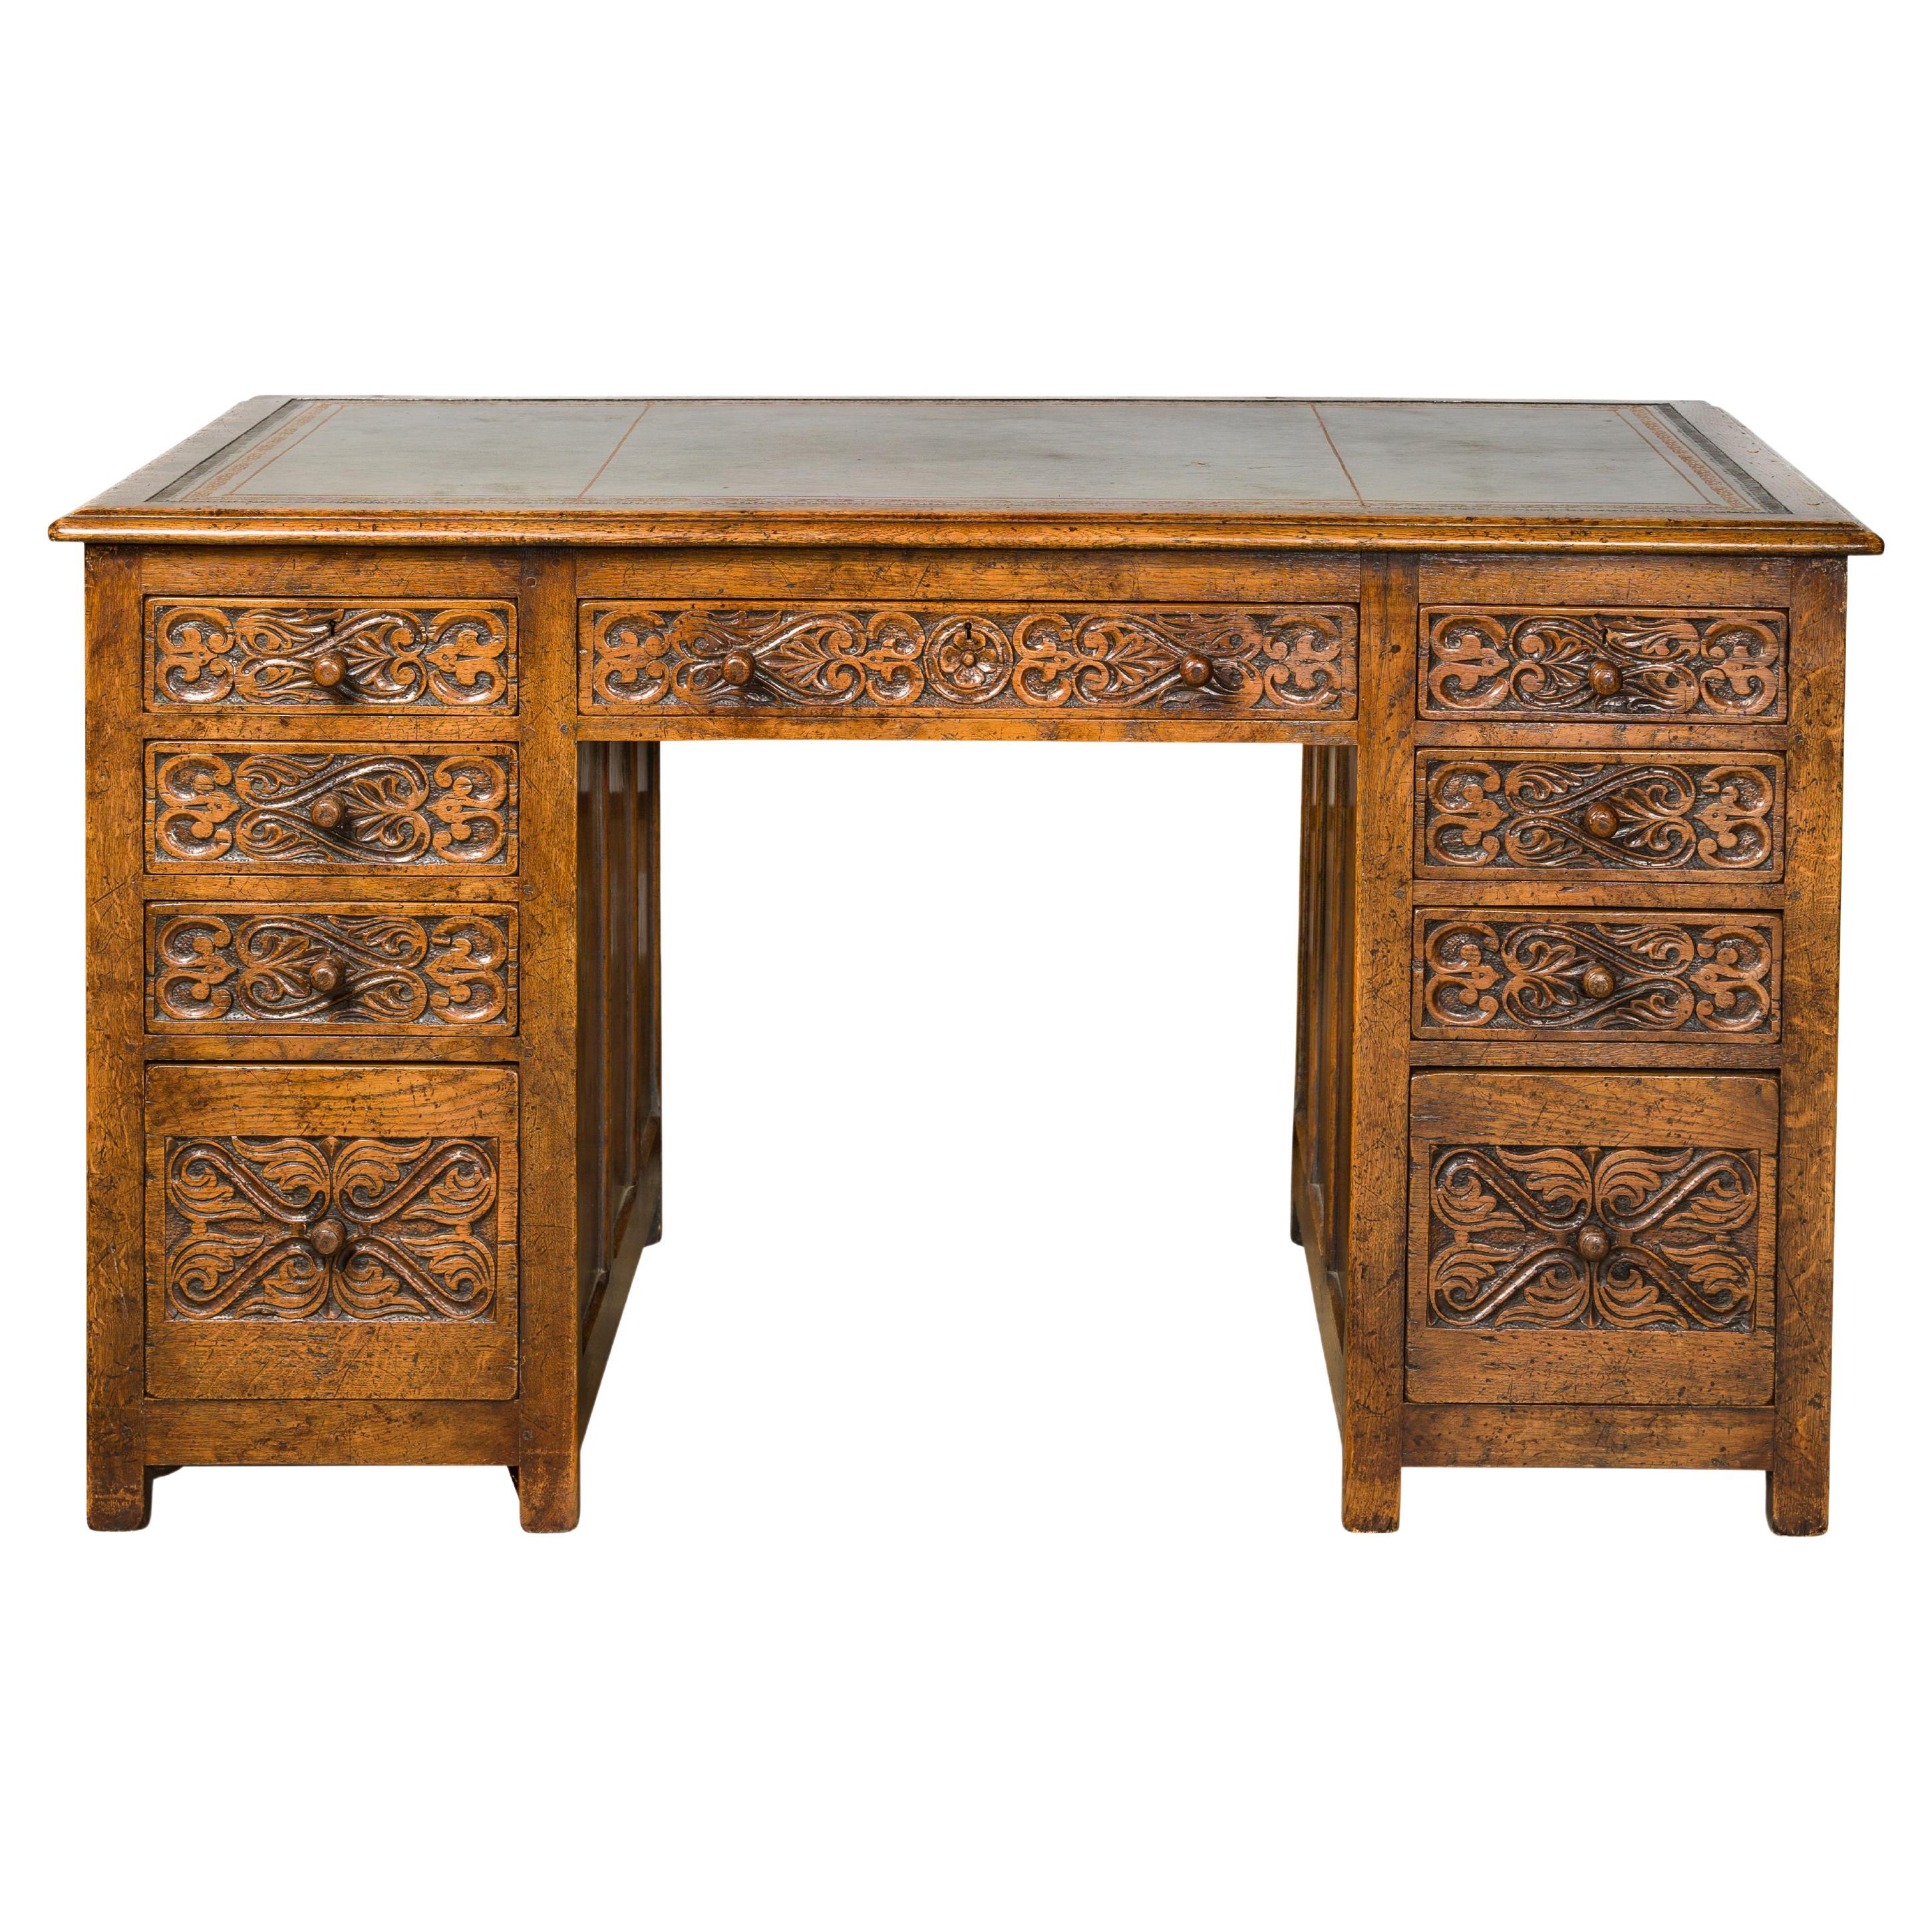 English 19th Century Oak Kneehole Desk with Nine Drawers and Carved Foliage For Sale